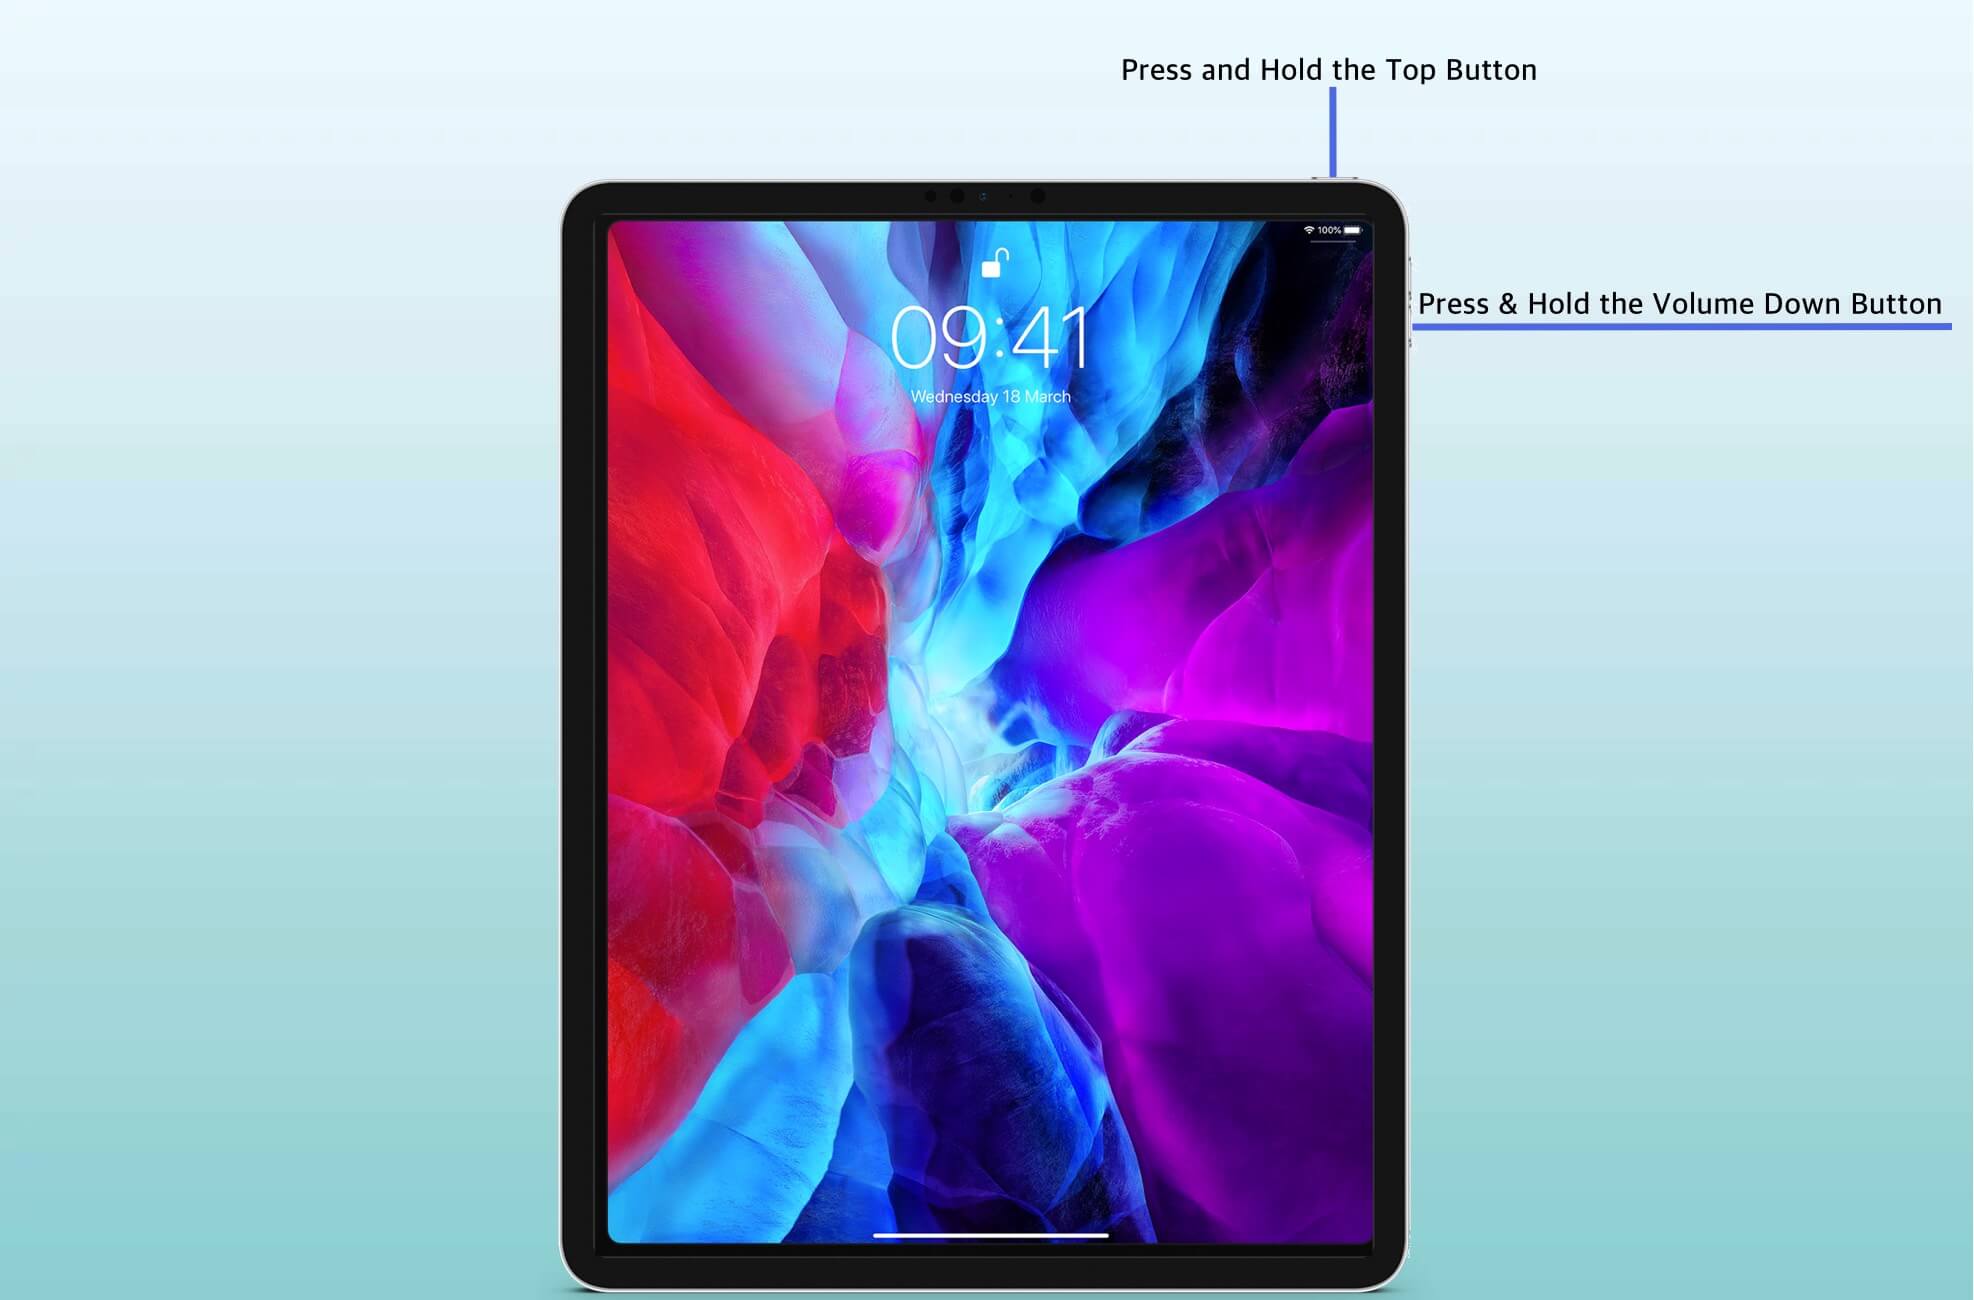 Press and Hold Top Button and Volume Down Button on iPad That has Face ID